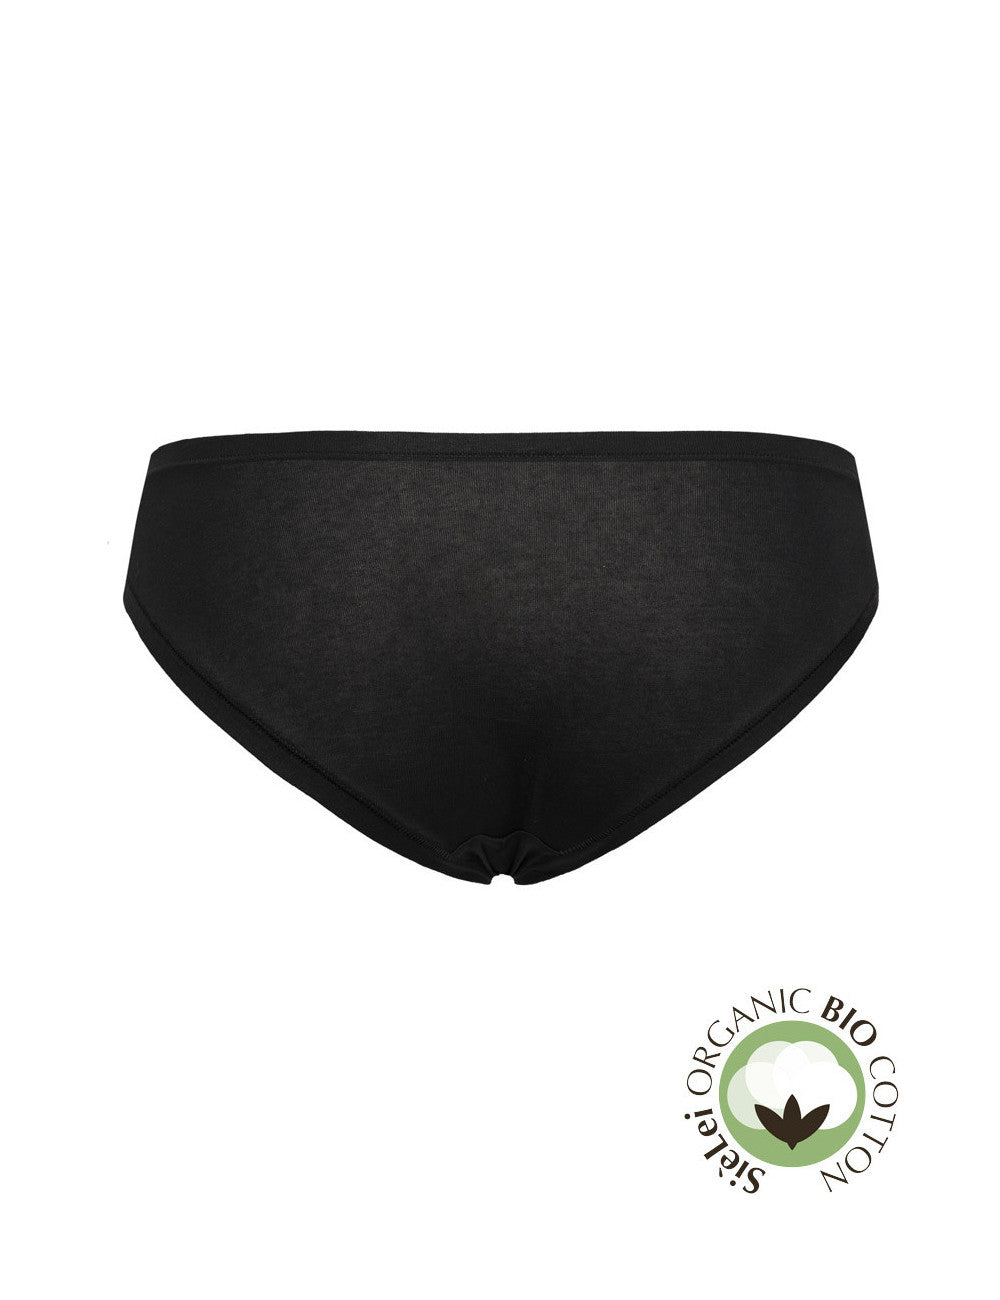 SIéLEI's Organic Cotton Brief from Italy is carefully constructed with hand-chosen organic cotton,